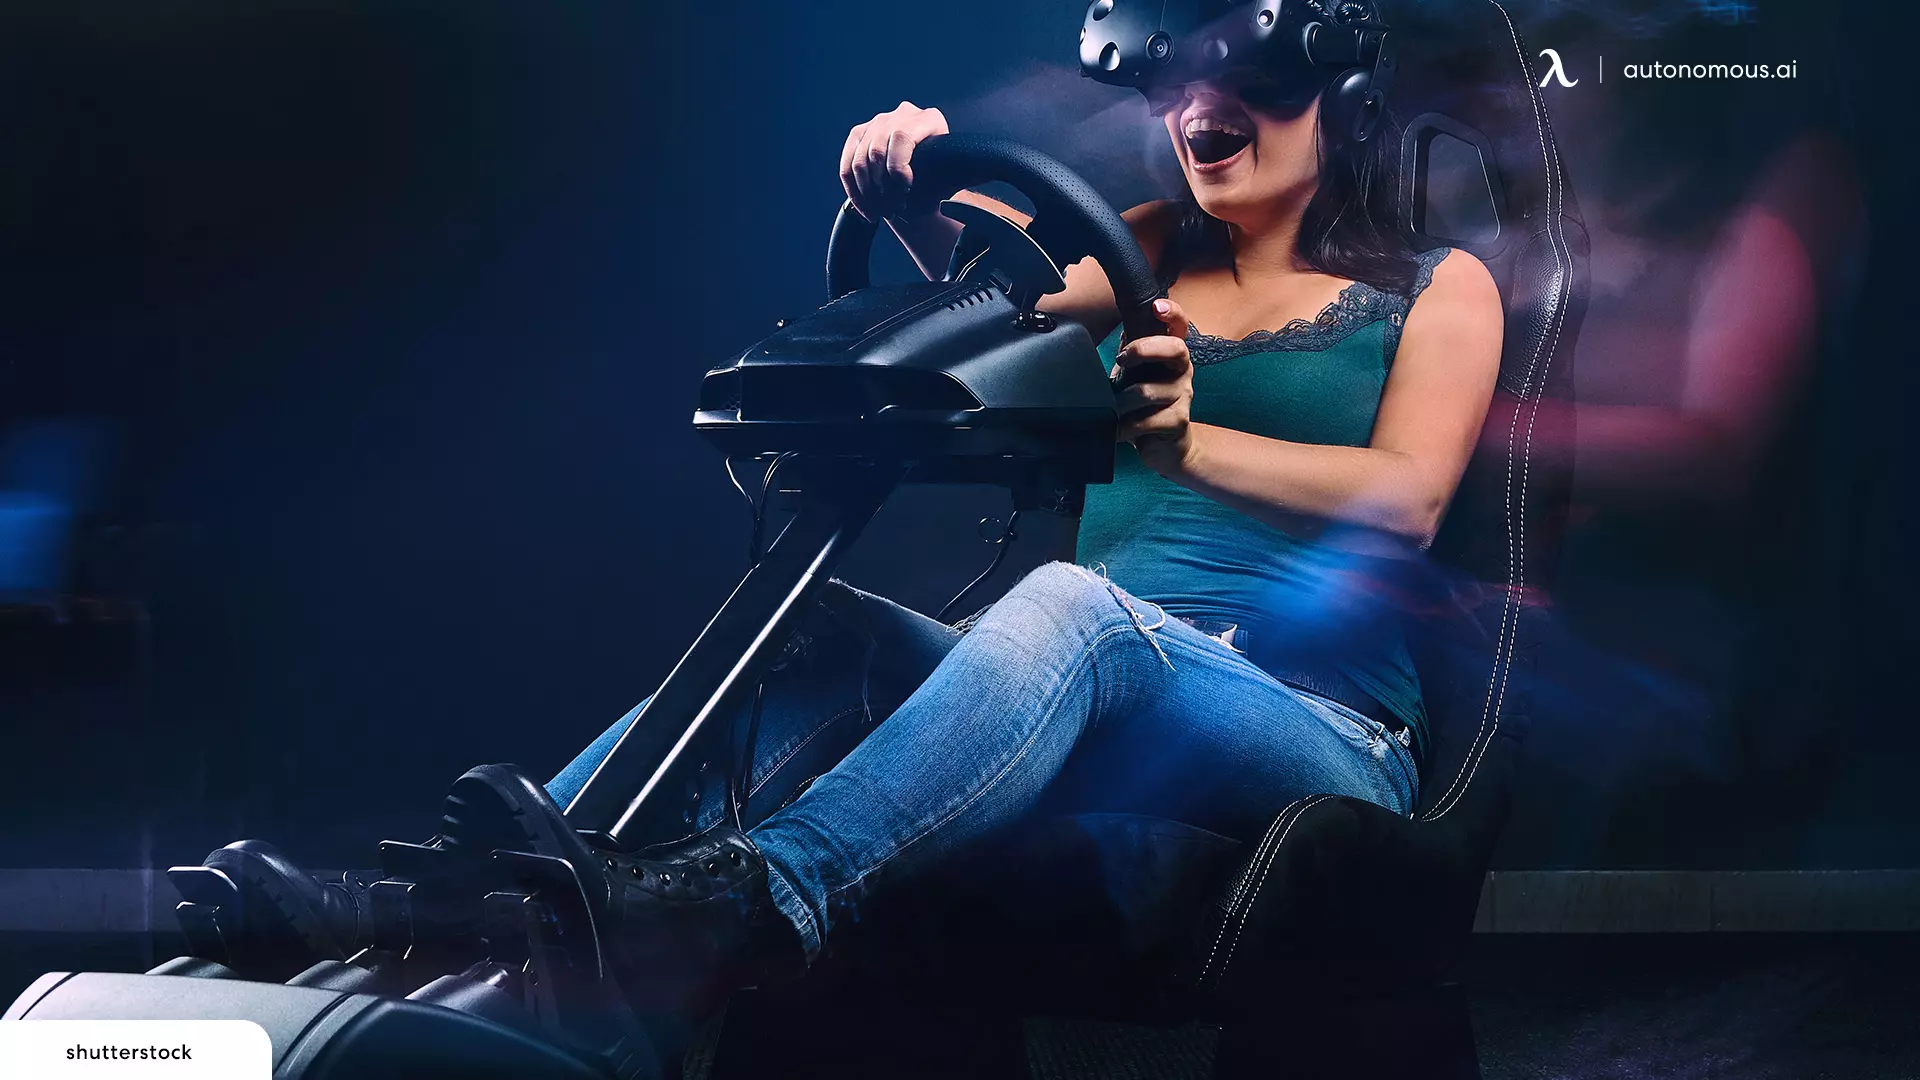 Cockpit & Seats for VR gaming room